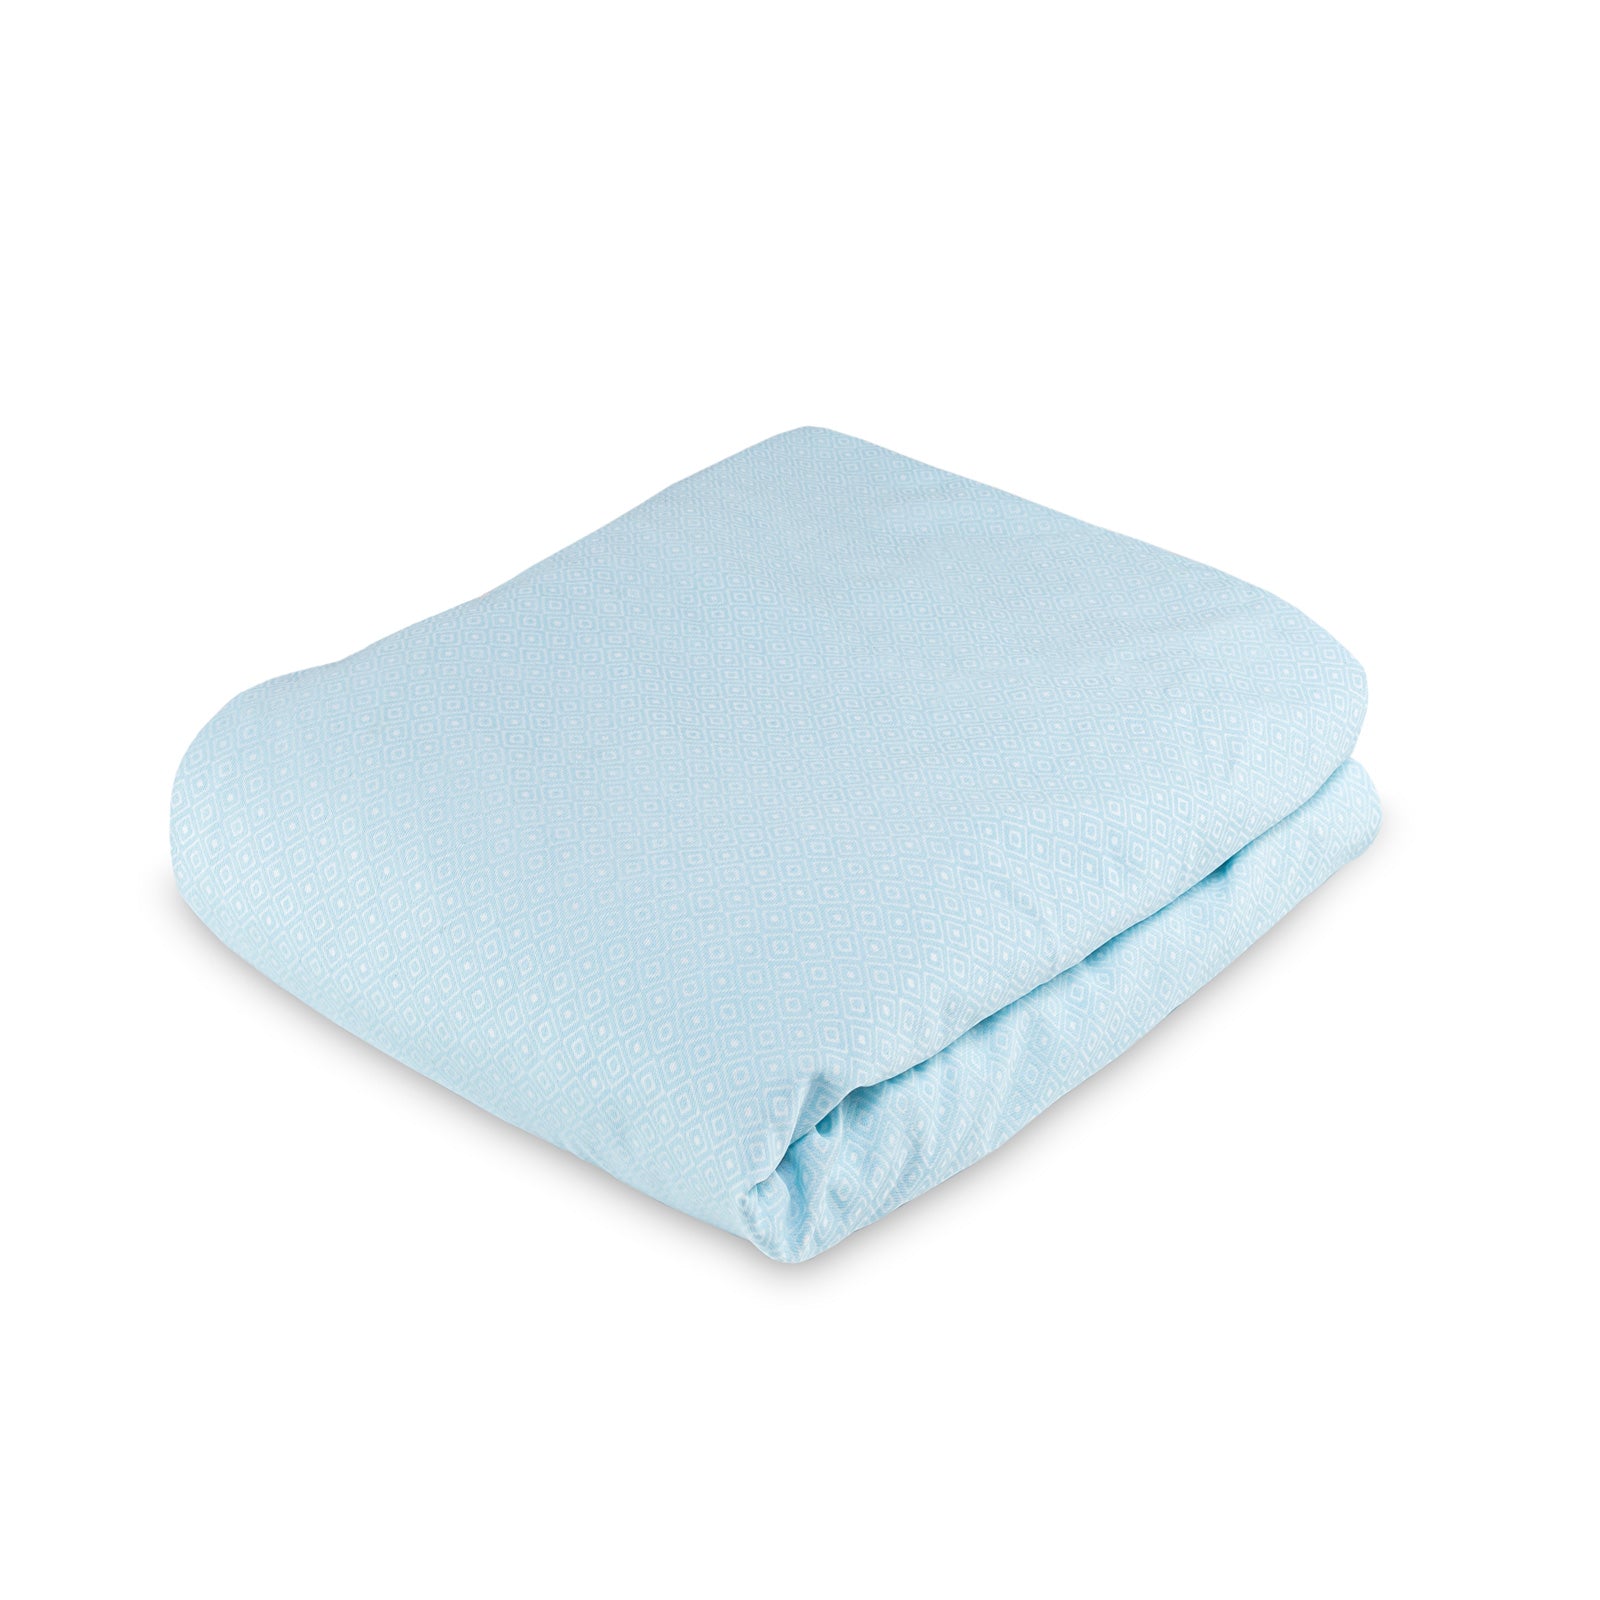 Temperature-regulating additional sheet Cool.ADDITION - Ideal sleeping climate, breathable, sweat less, freeze less